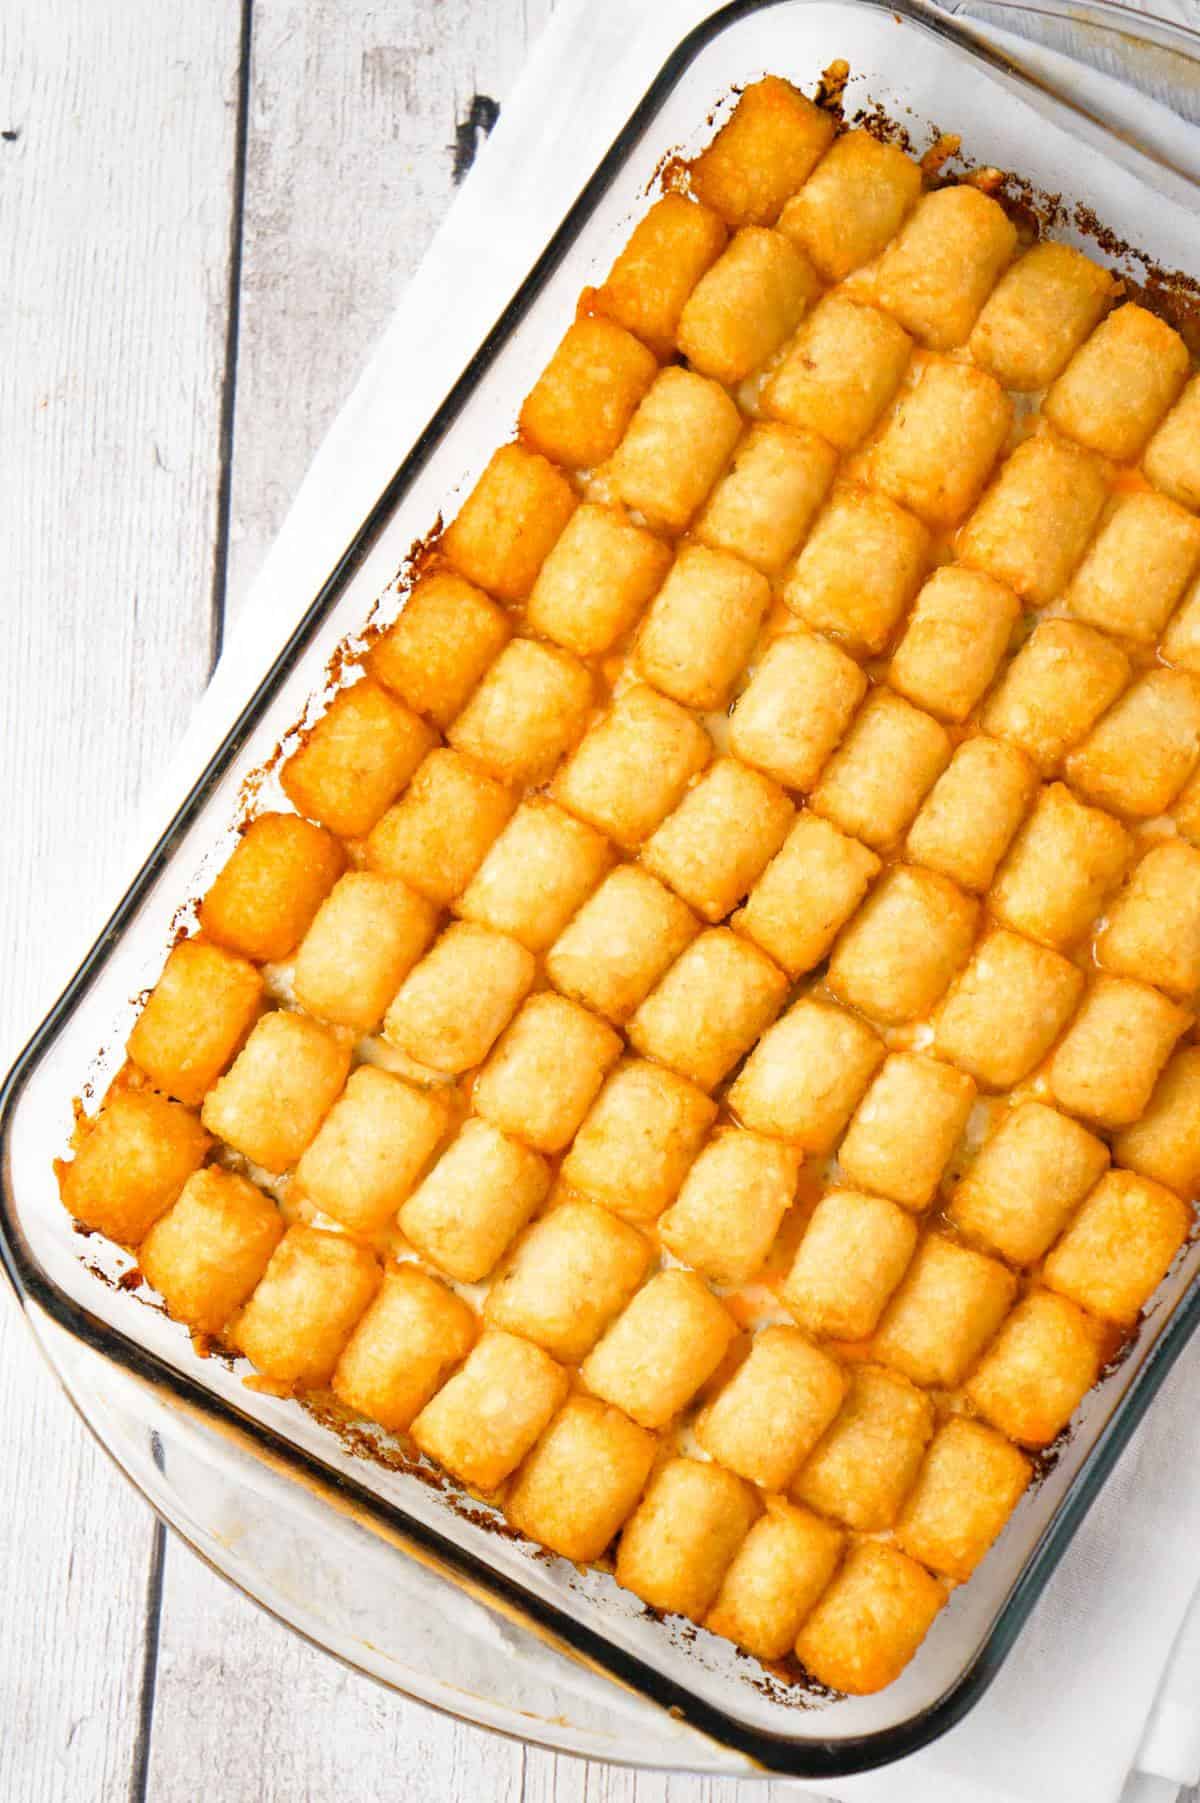 Big Mac Tater Tot Casserole is an easy dinner recipe that starts out with a base of ground beef, onions and dill pickles, all tossed in a copycat Big Mac sauce, and then topped with cheddar cheese and tater tots.